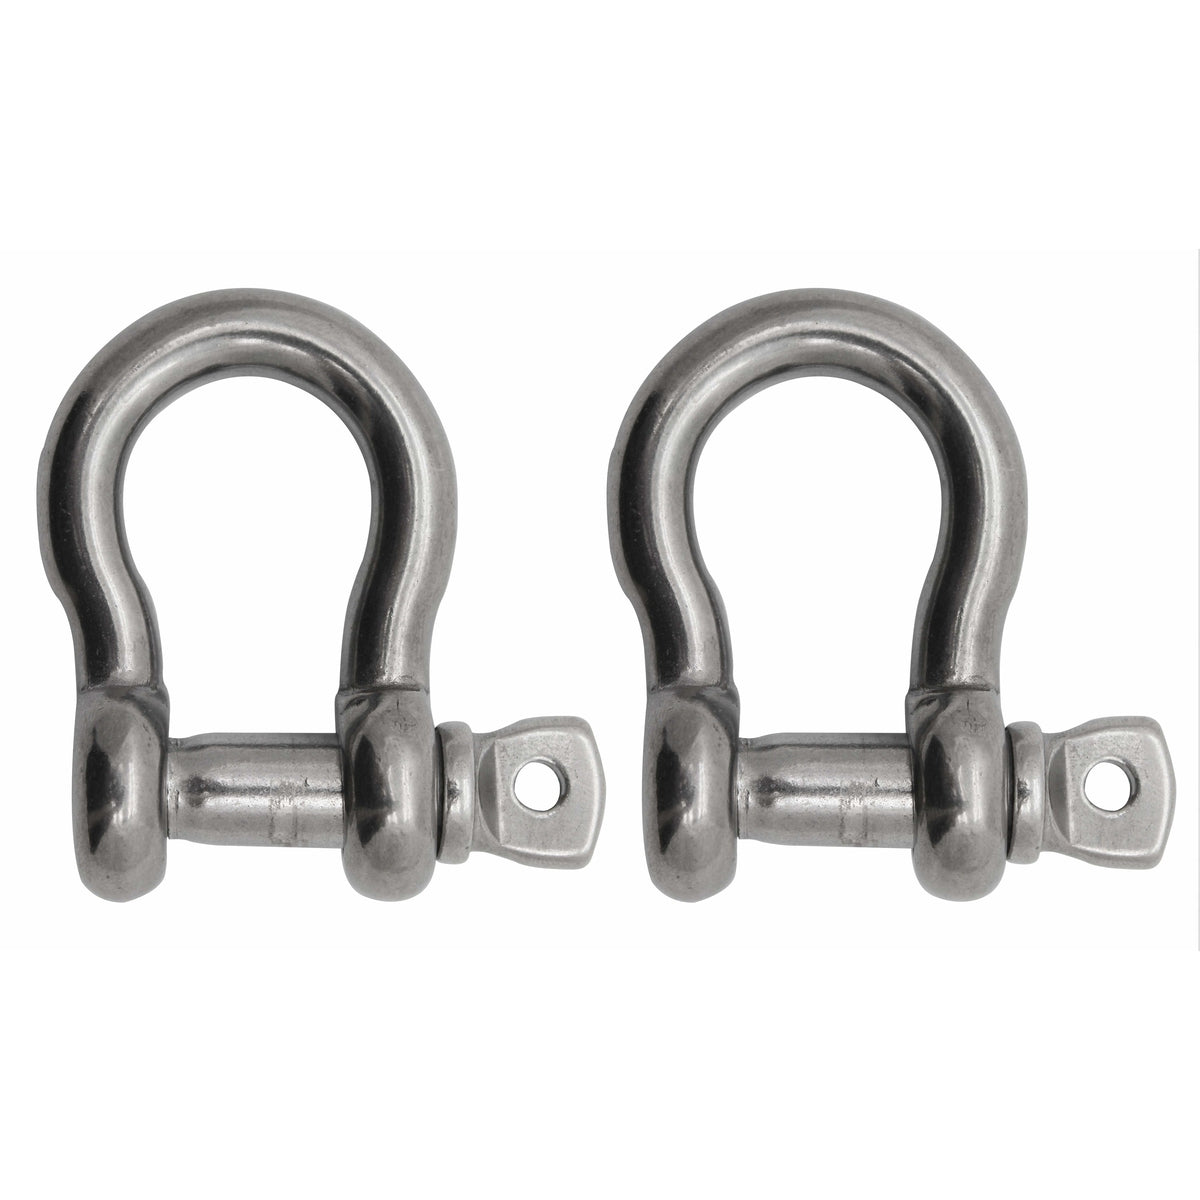 Extreme Max BoatTector SS Anchor Shackle 5/8" 2-pk #3006.8327.2